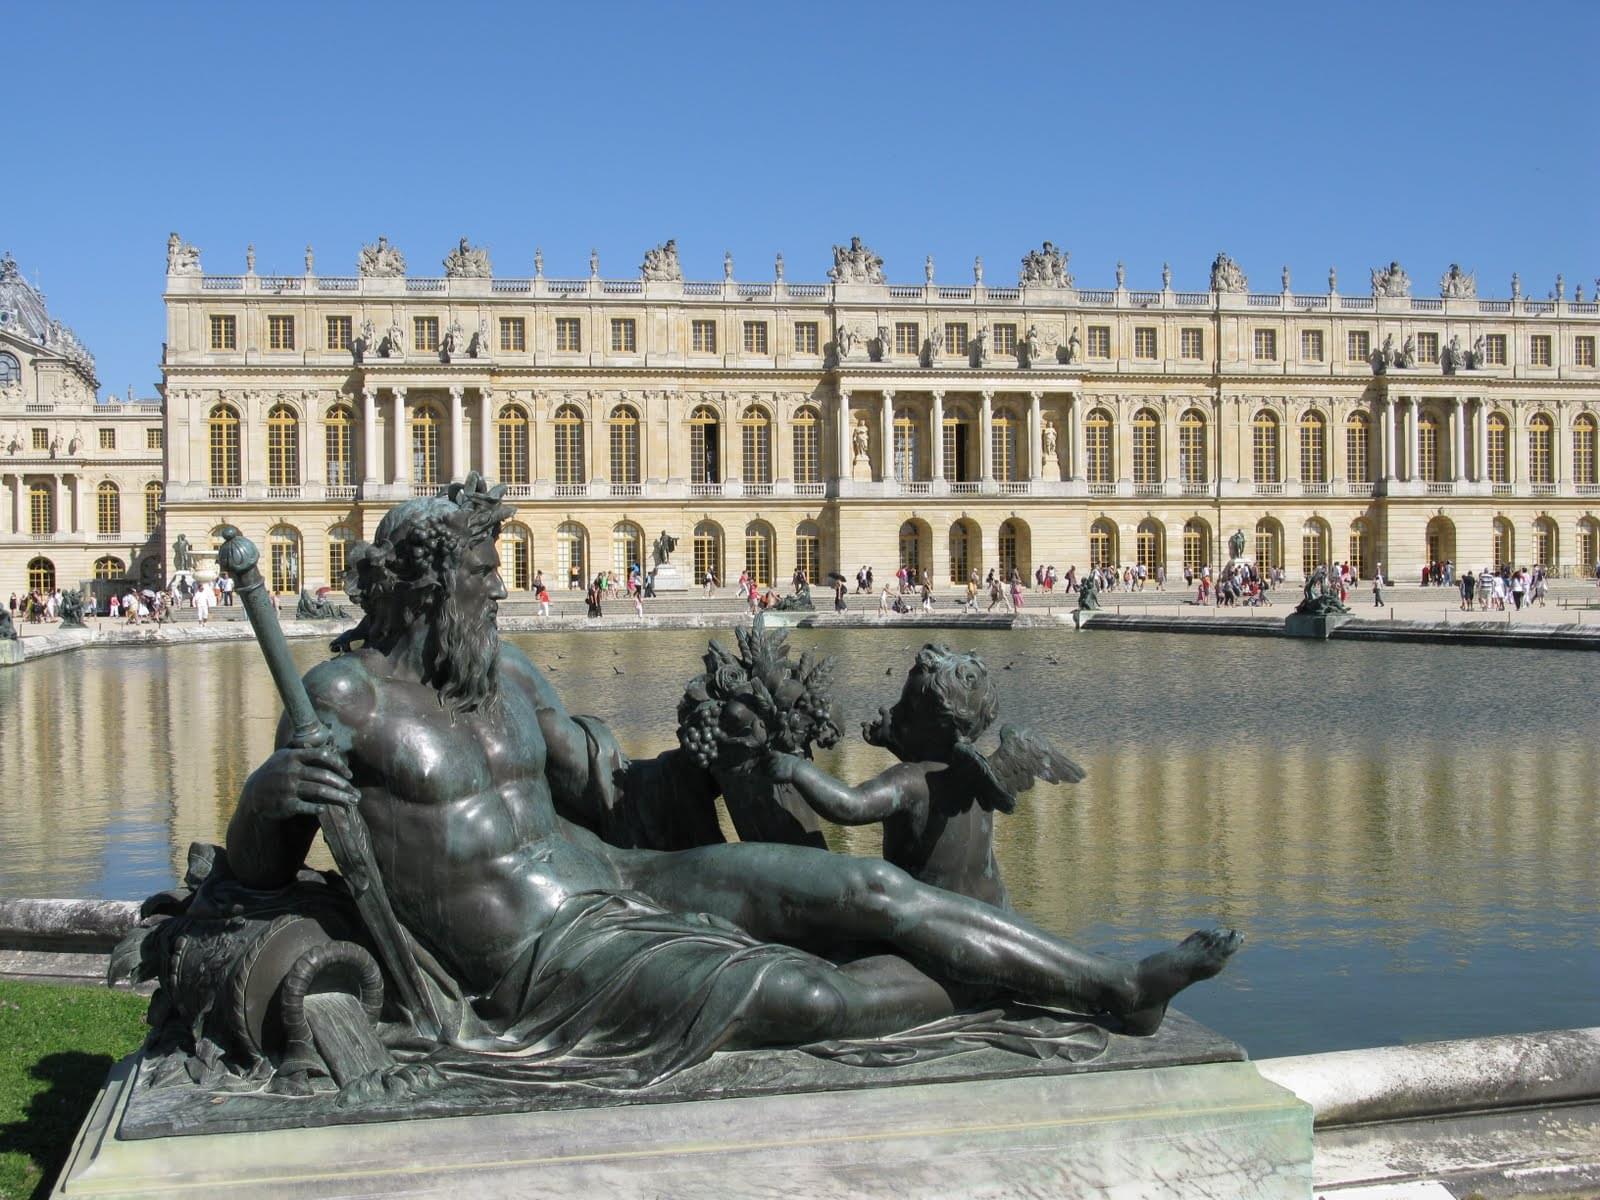 We advise you to enjoy visiting the beauty of the - We advise you to enjoy visiting the beauty of the Palace of Versailles